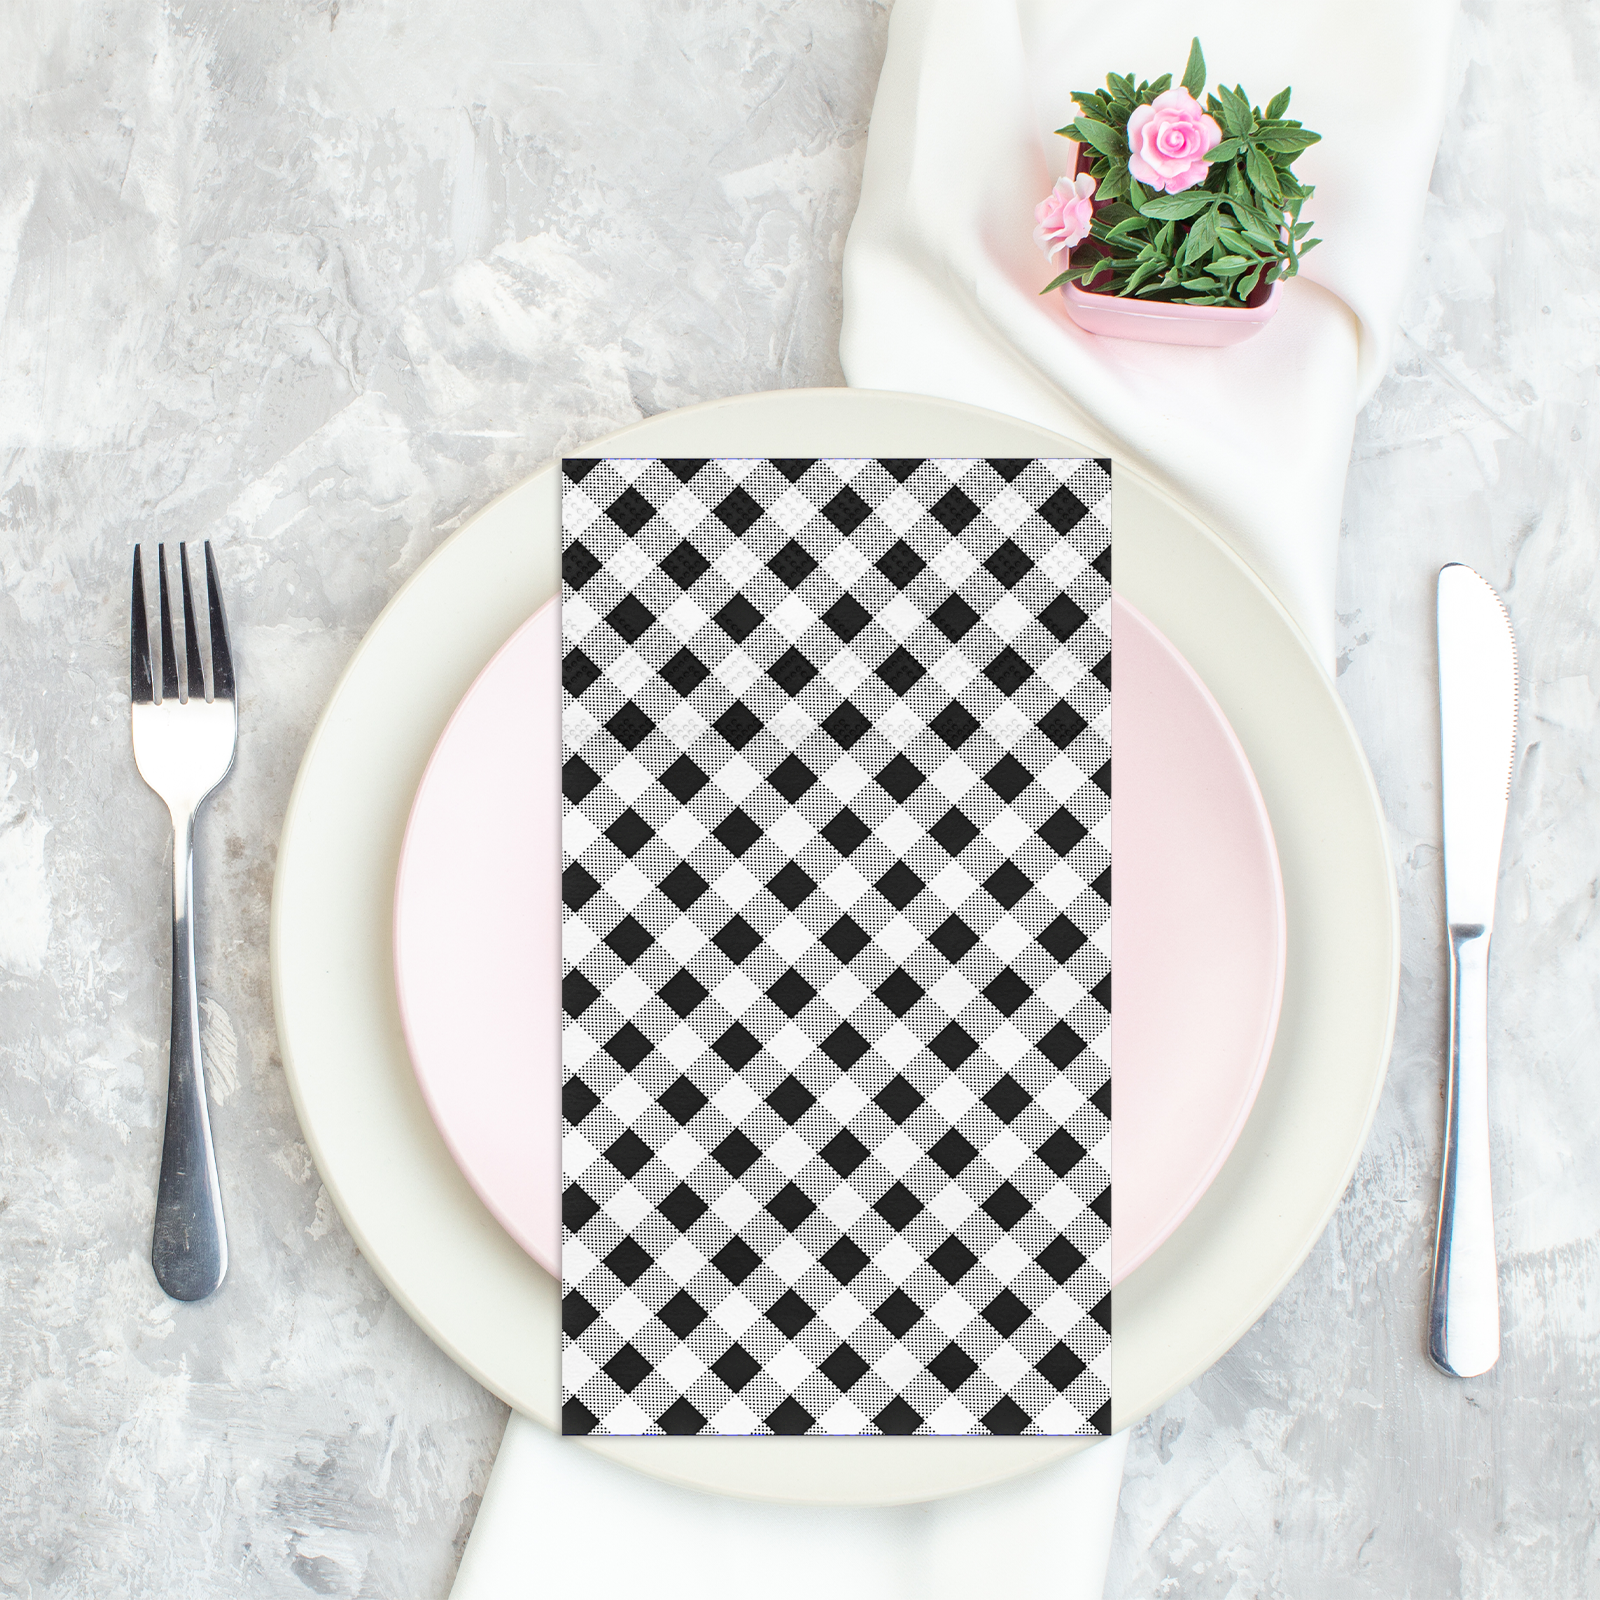 DYLIVeS 50 Count Gingham Guest Napkins 3 Ply Disposable Paper Dinner Hand Napkin for Bathroom Powder Room Holiday Wedding Birthday Party Bridaland Baby Shower Decorative Towels - image 3 of 7